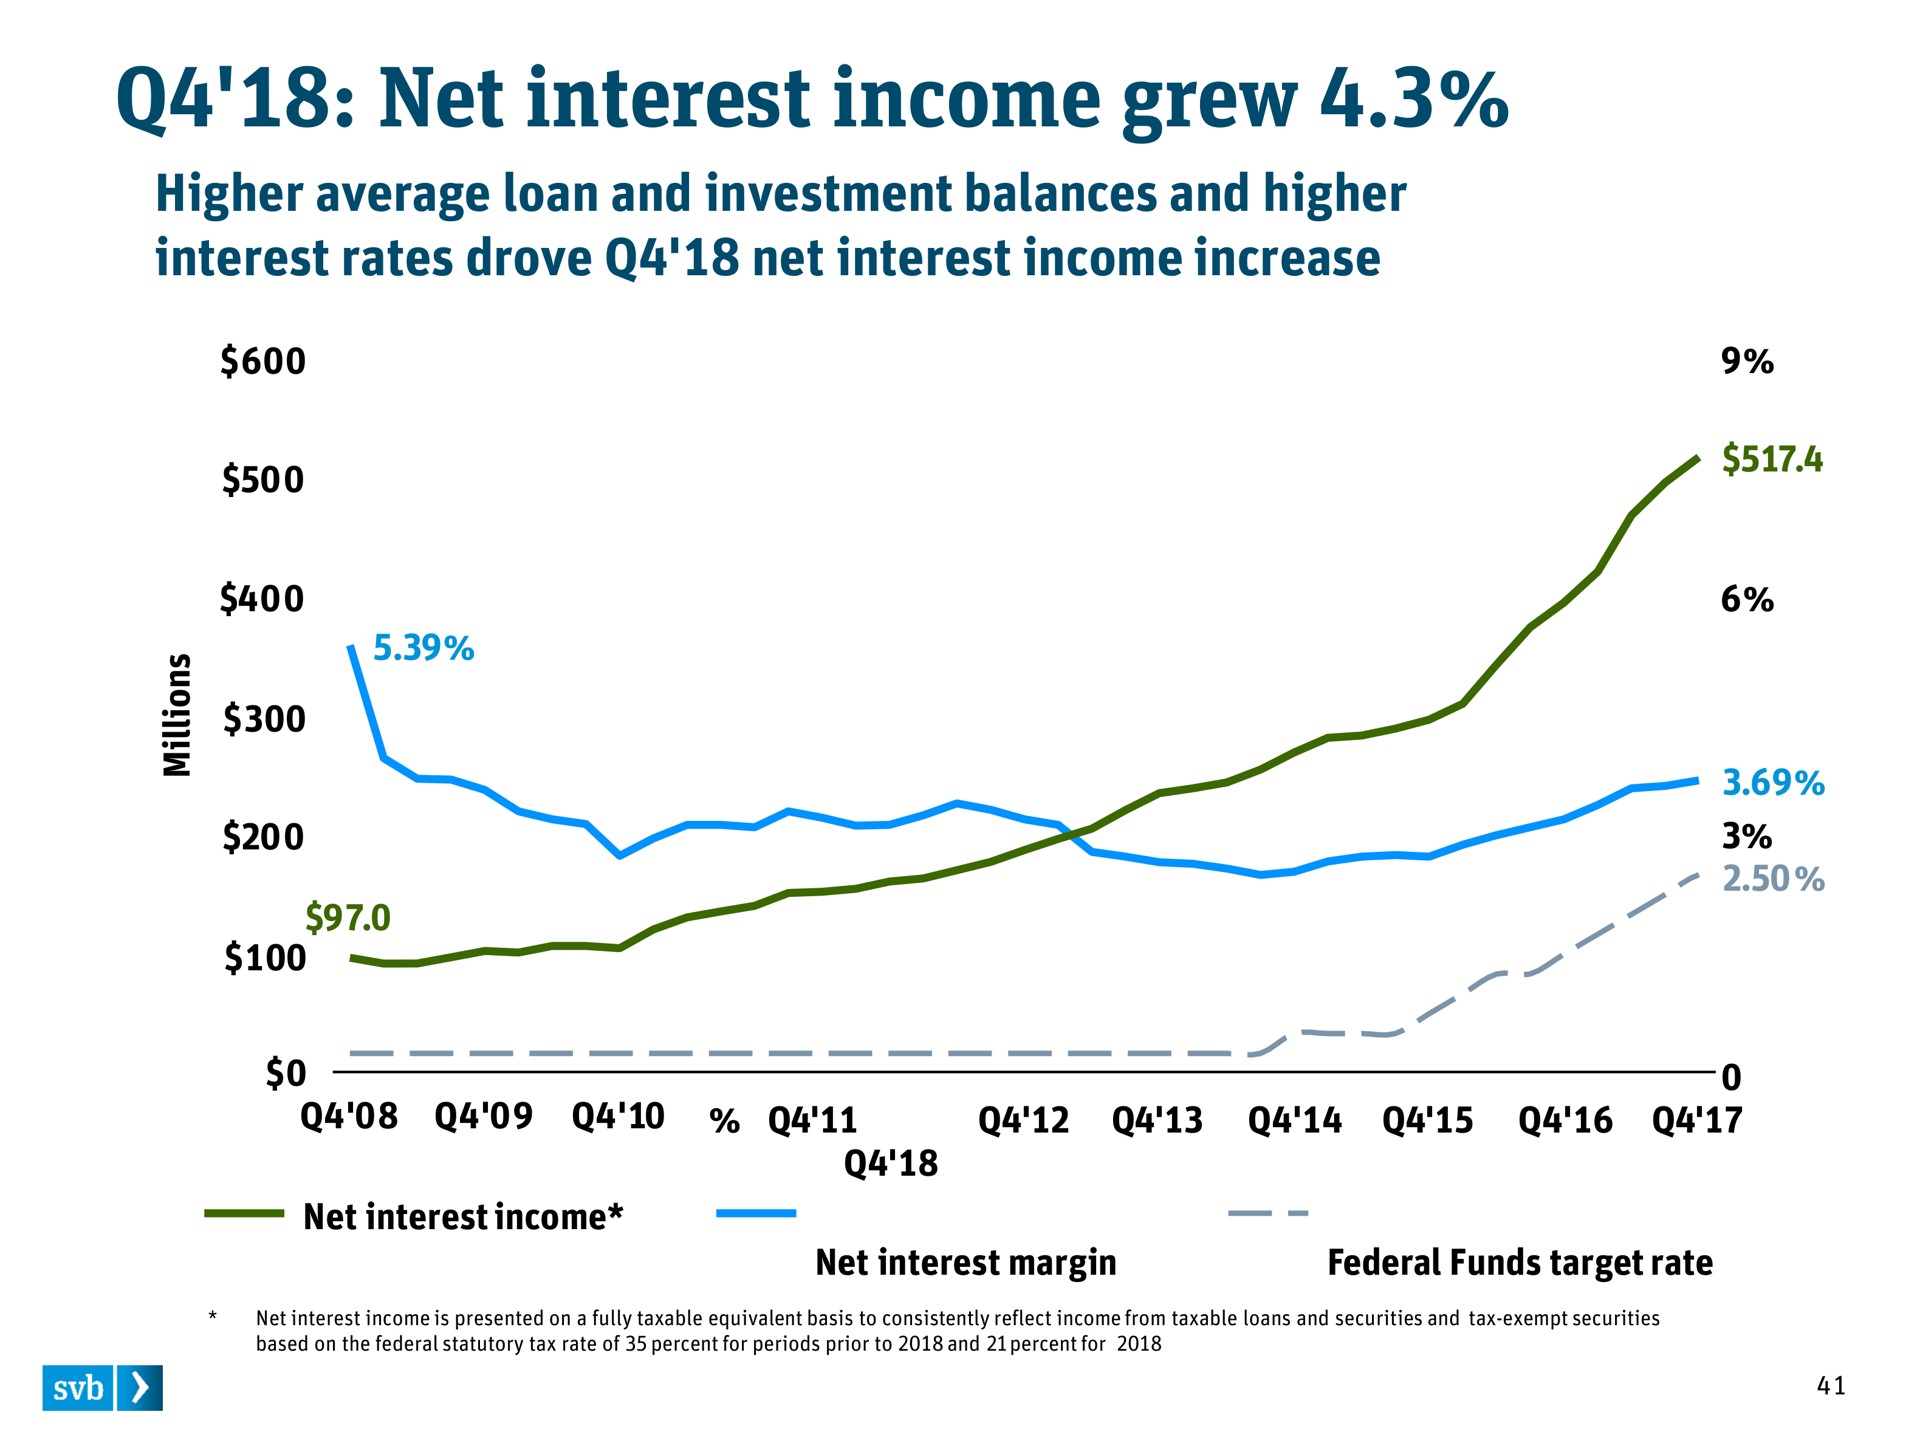 net interest income grew | Silicon Valley Bank